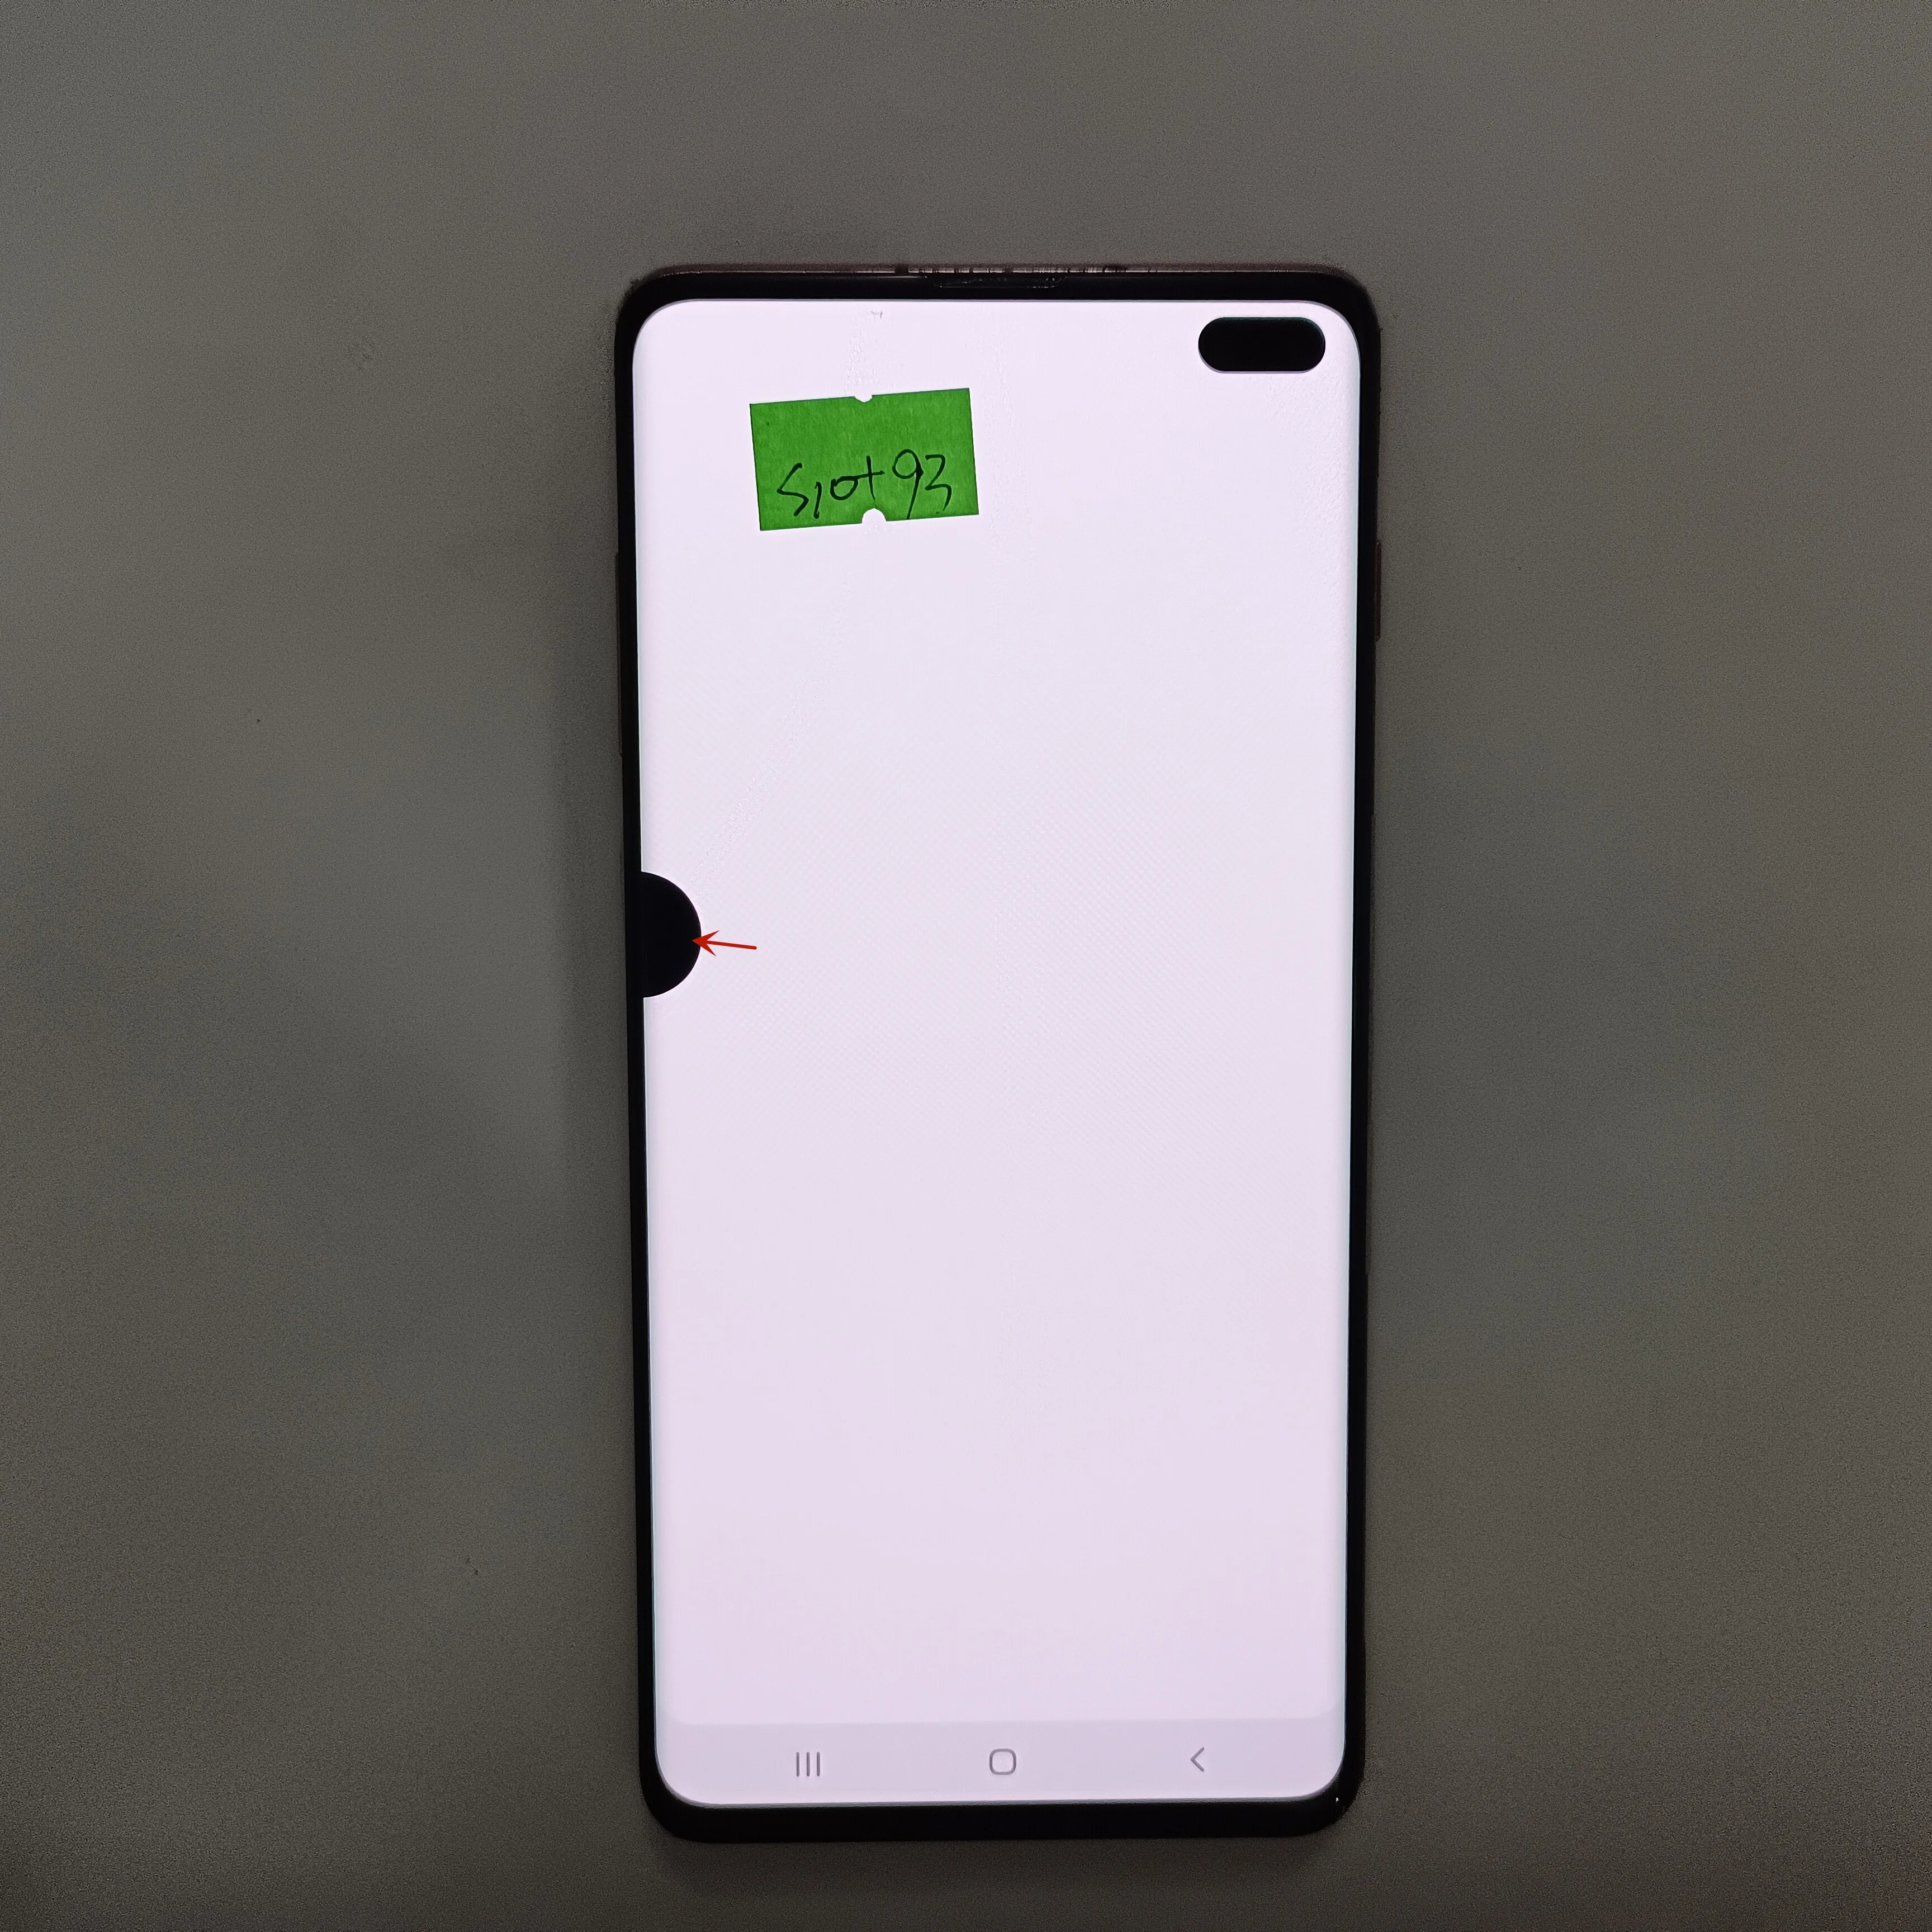 Original S10+ AMOLED LCD For SAMSUNG Galaxy S10 Plus G975 SM-G9750 G975F LCD Display Touch Screen Digitizer Assembly With defect enlarge